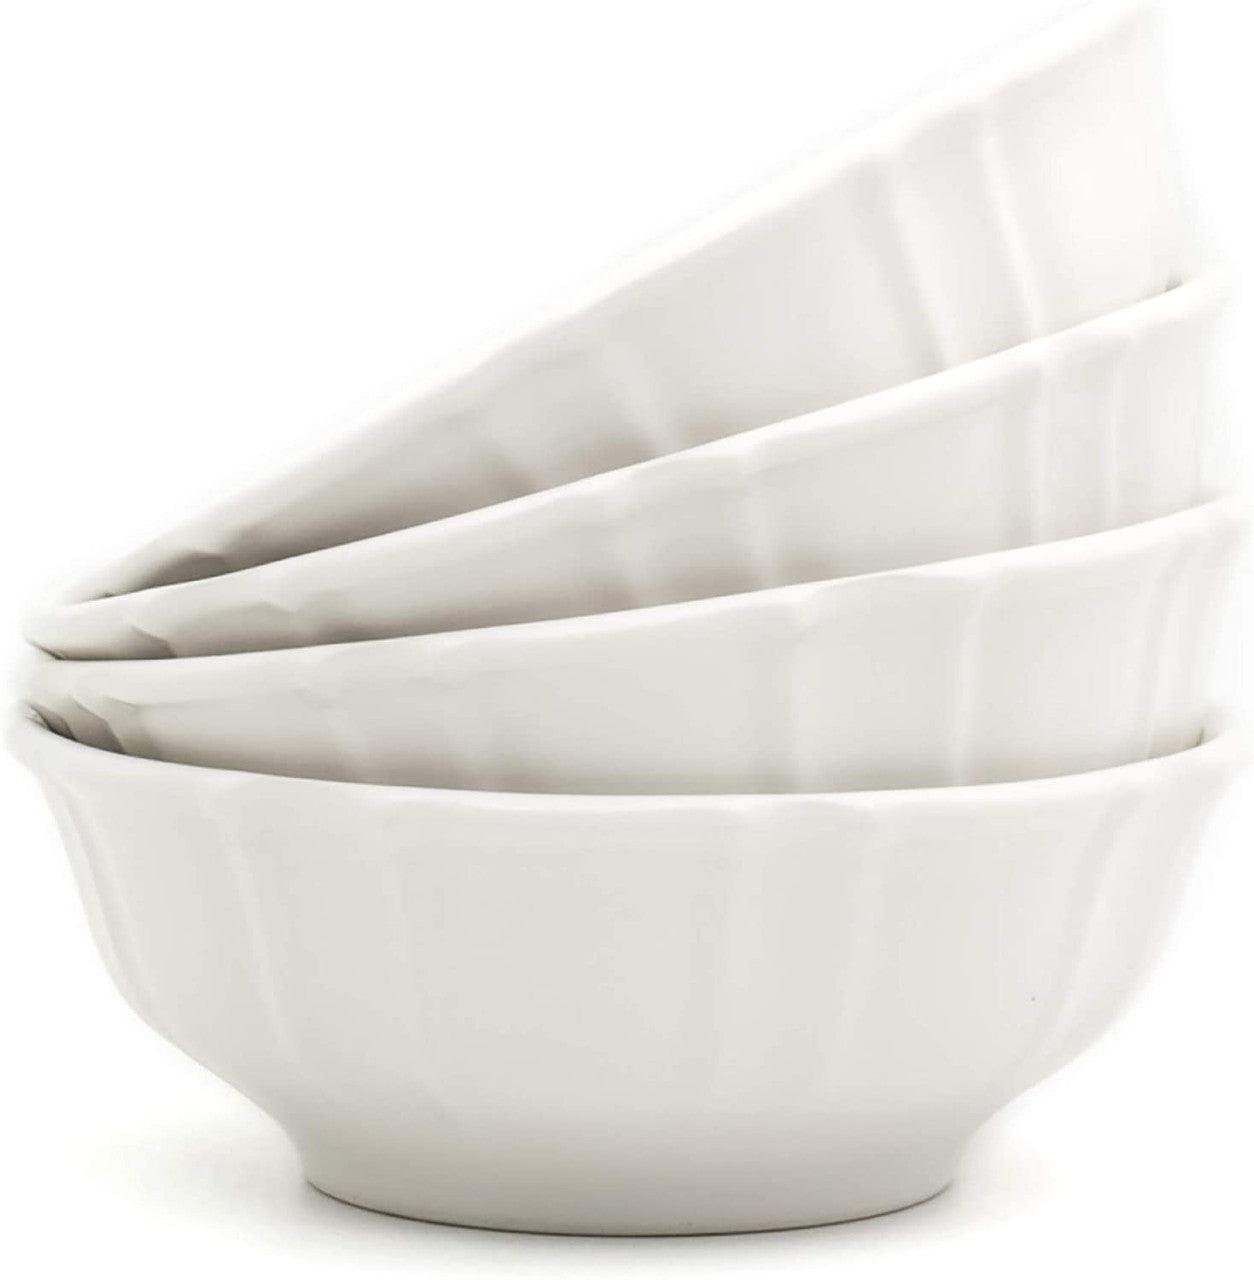 Chloe 4 Piece Soup/Cereal Bowl Set in White